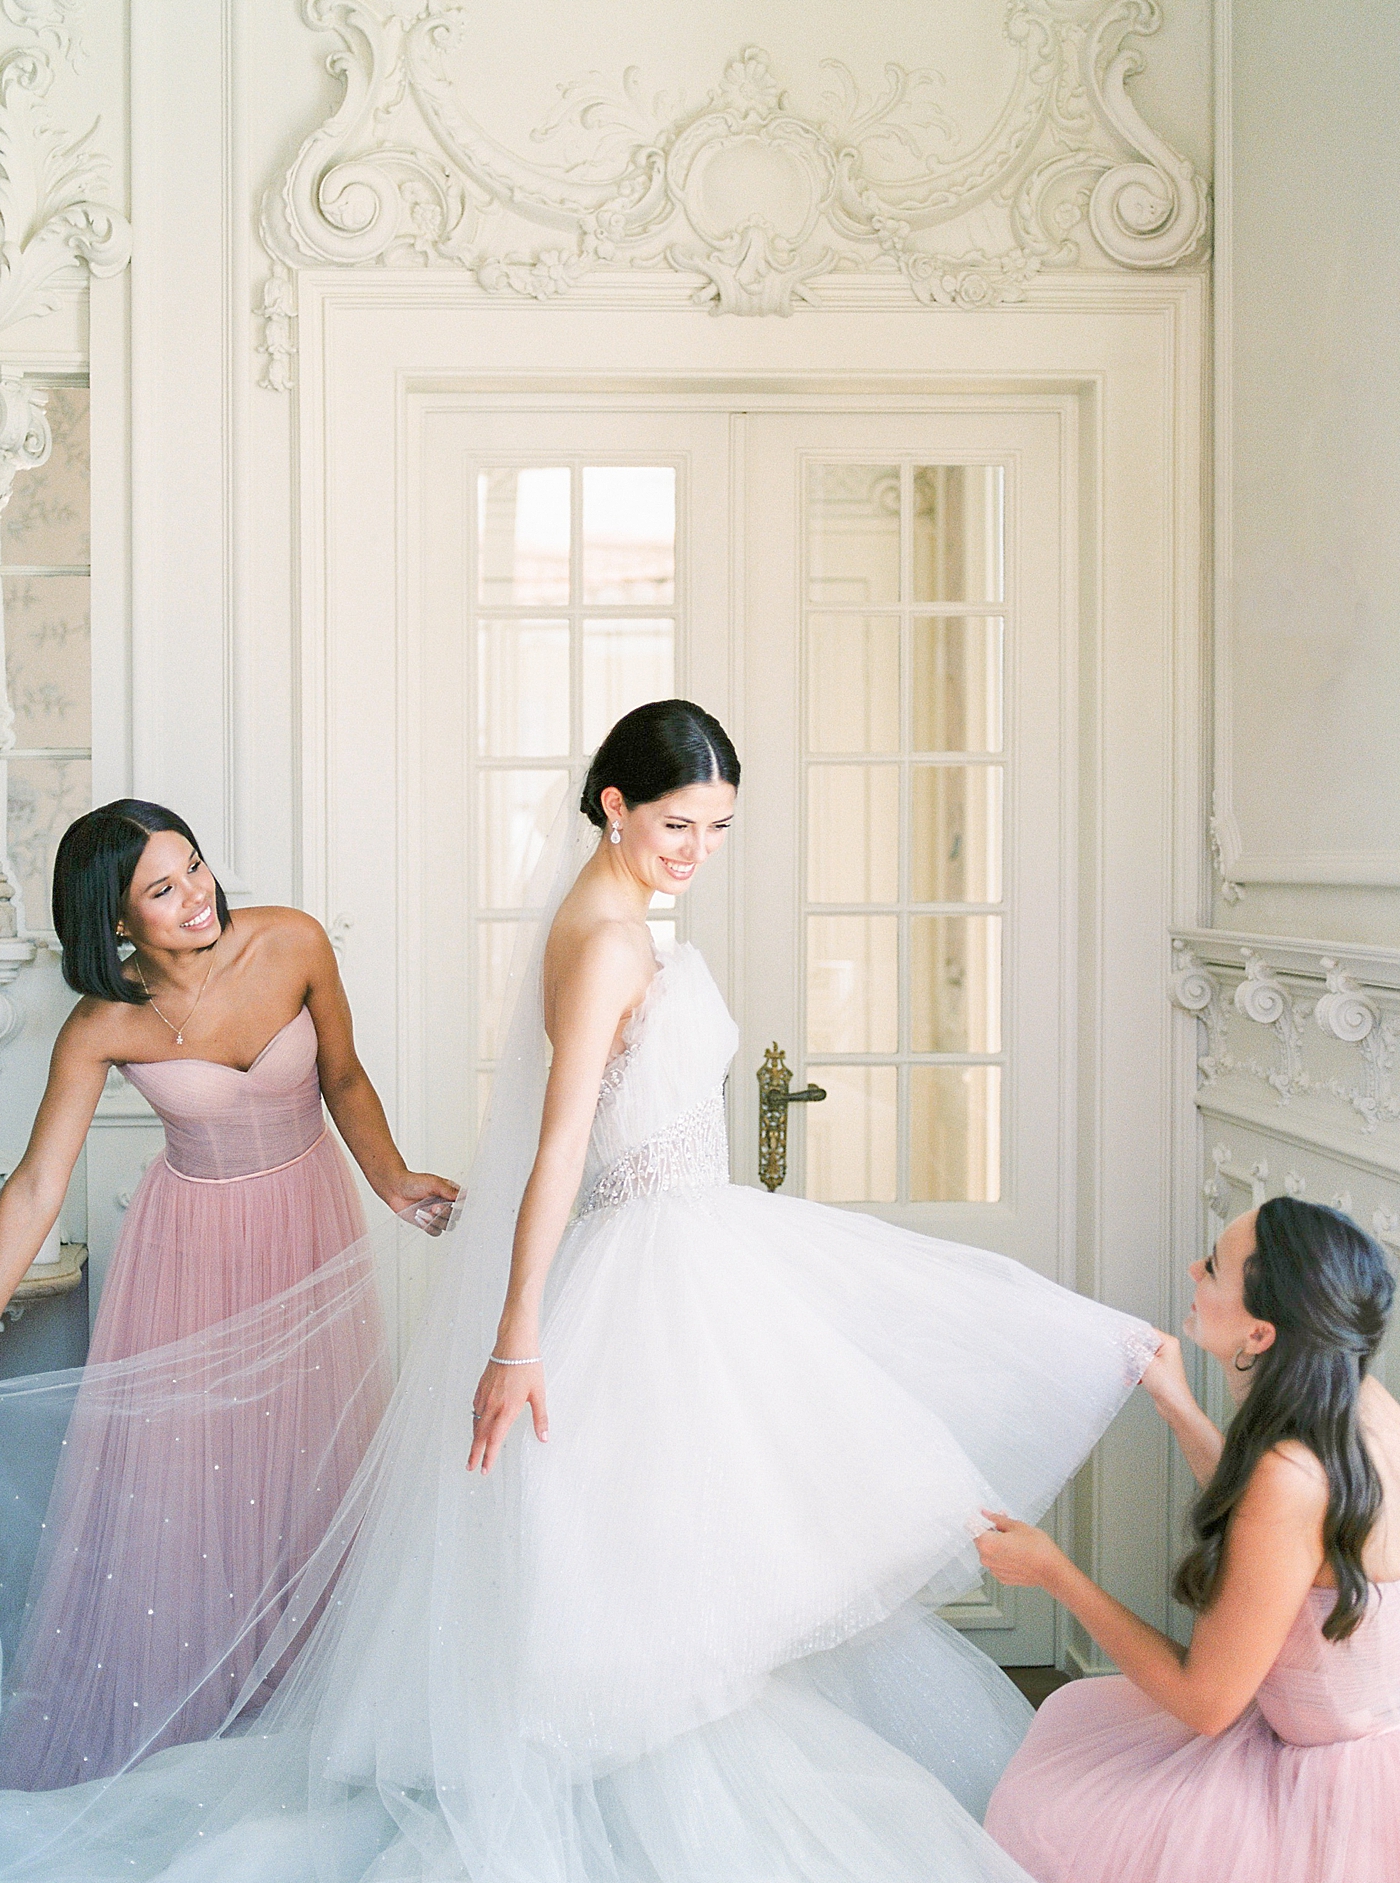 Bridesmaids adjusting brides gown in her getting ready room | Image by Diane Sotero 